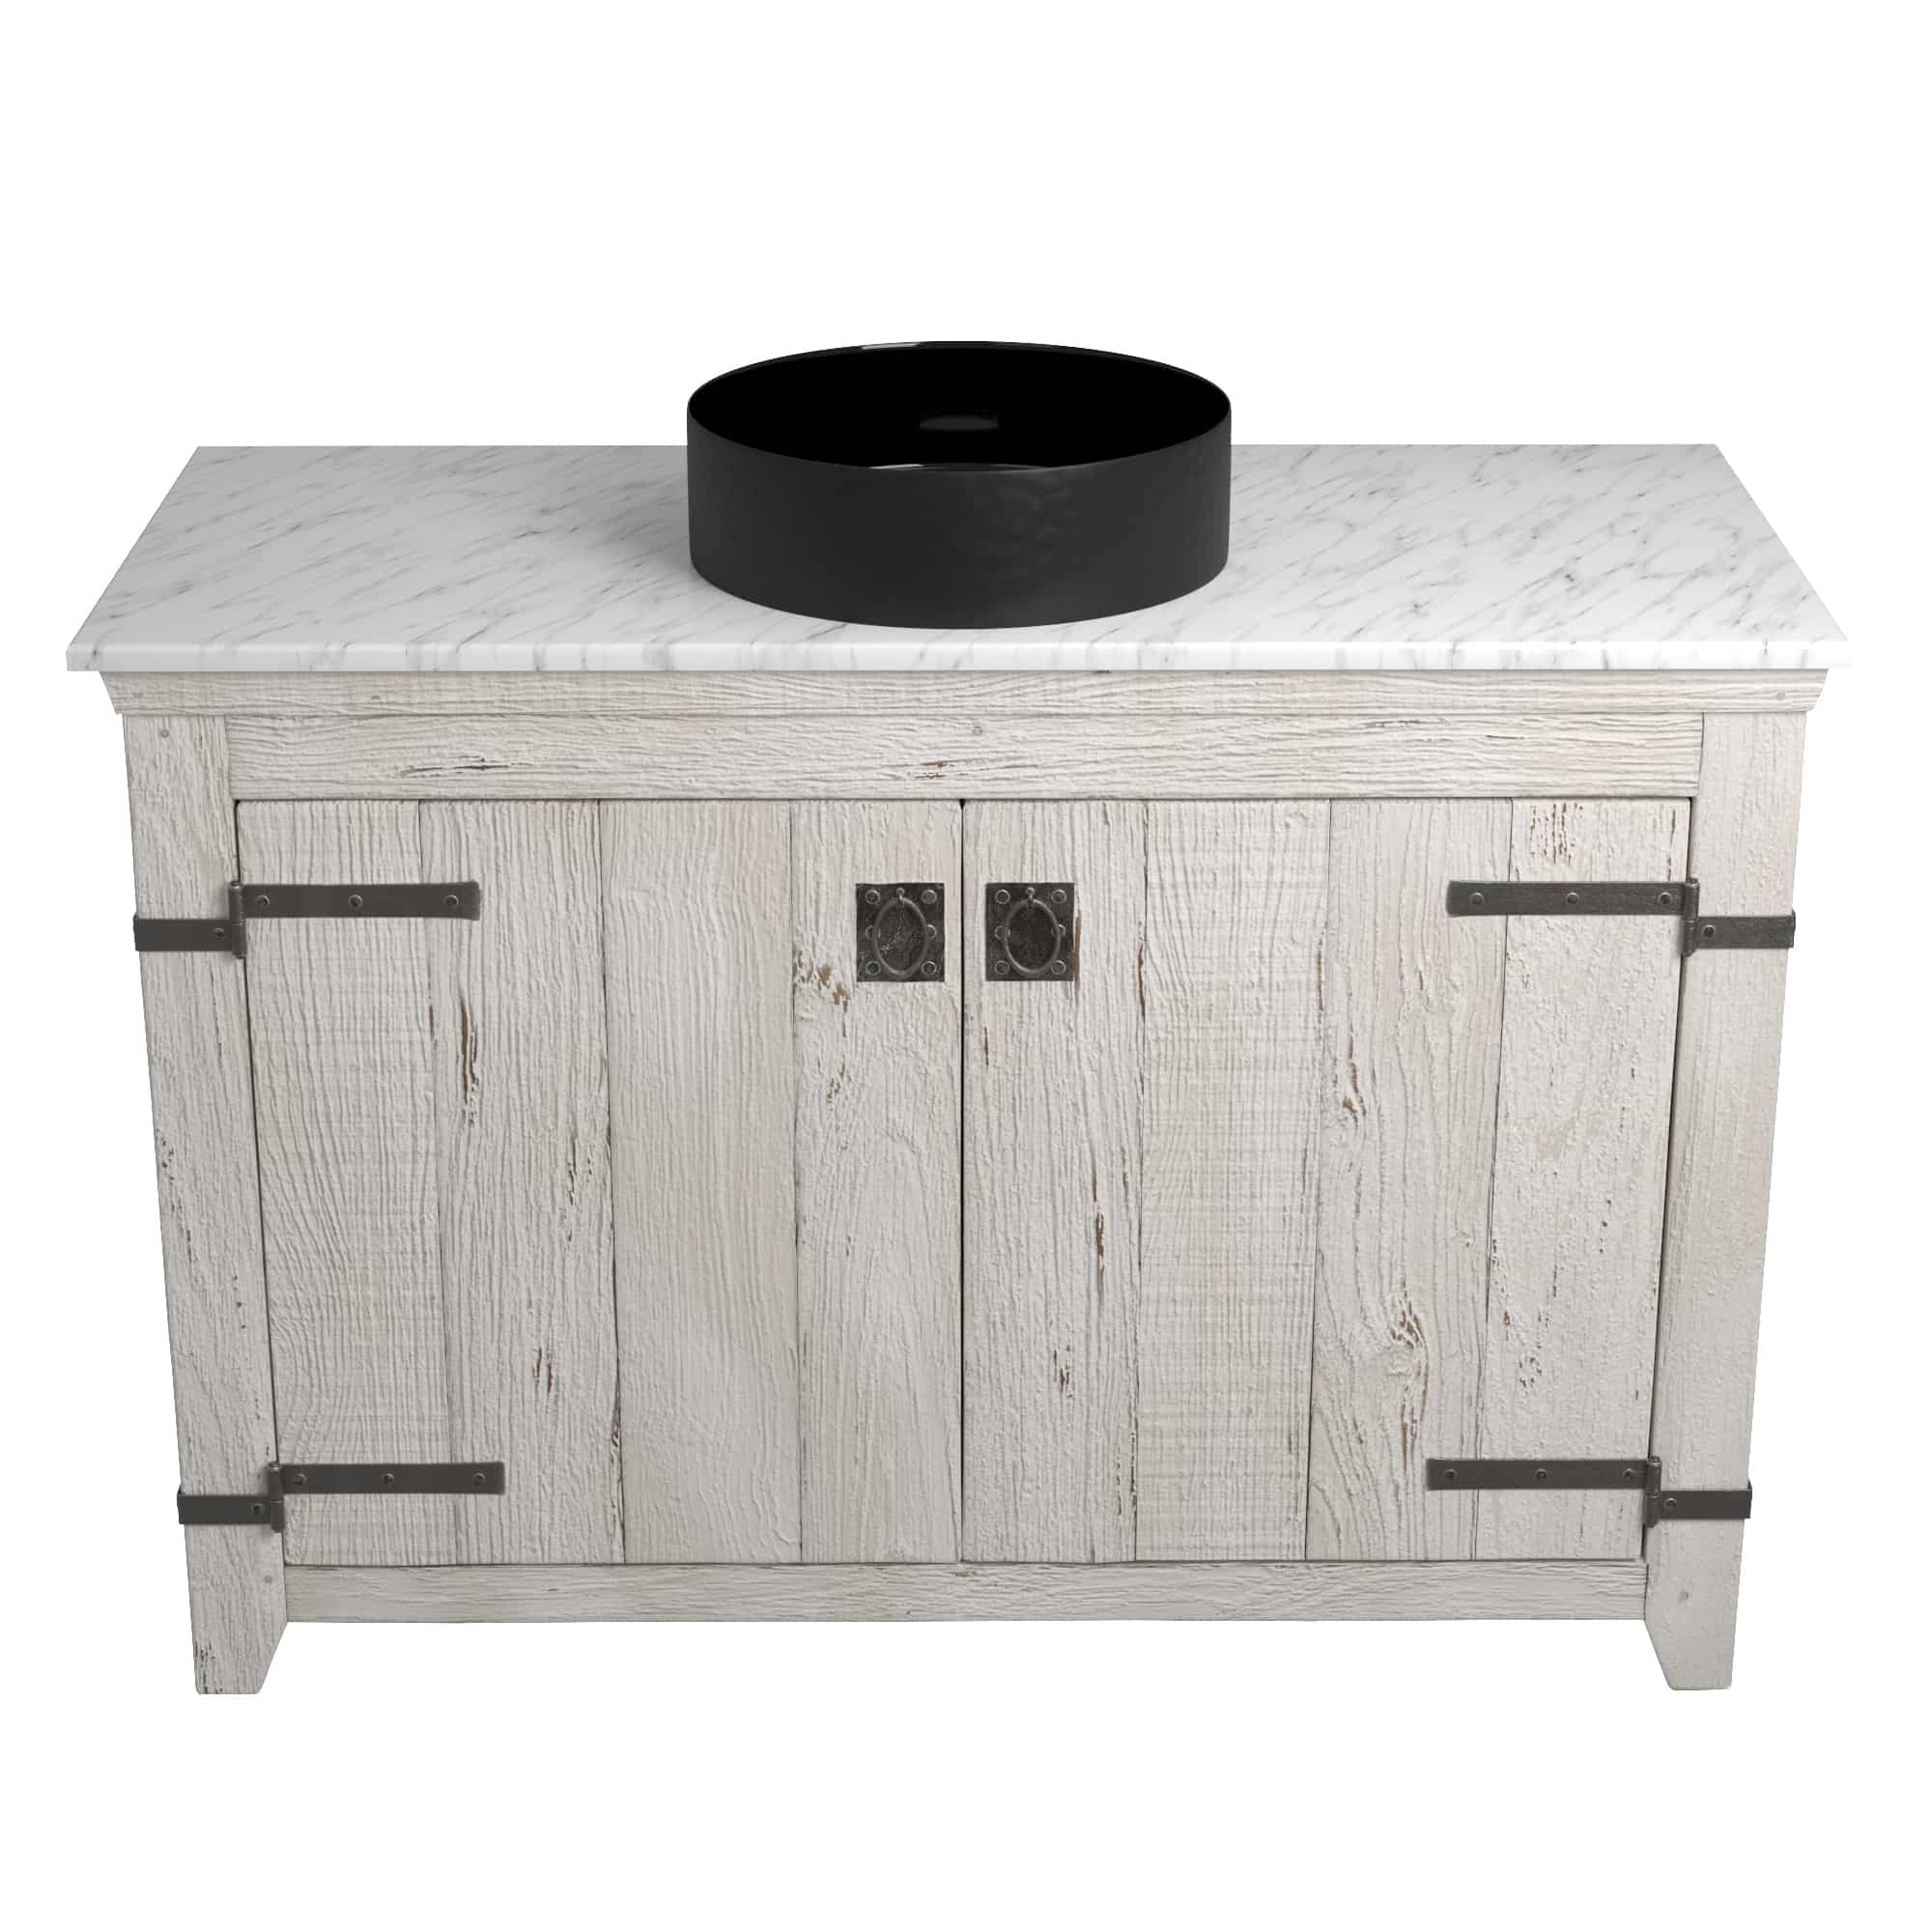 Native Trails 48" Americana Vanity in Whitewash with Carrara Marble Top and Positano in Abyss, Single Faucet Hole, BND48-VB-CT-MG-041